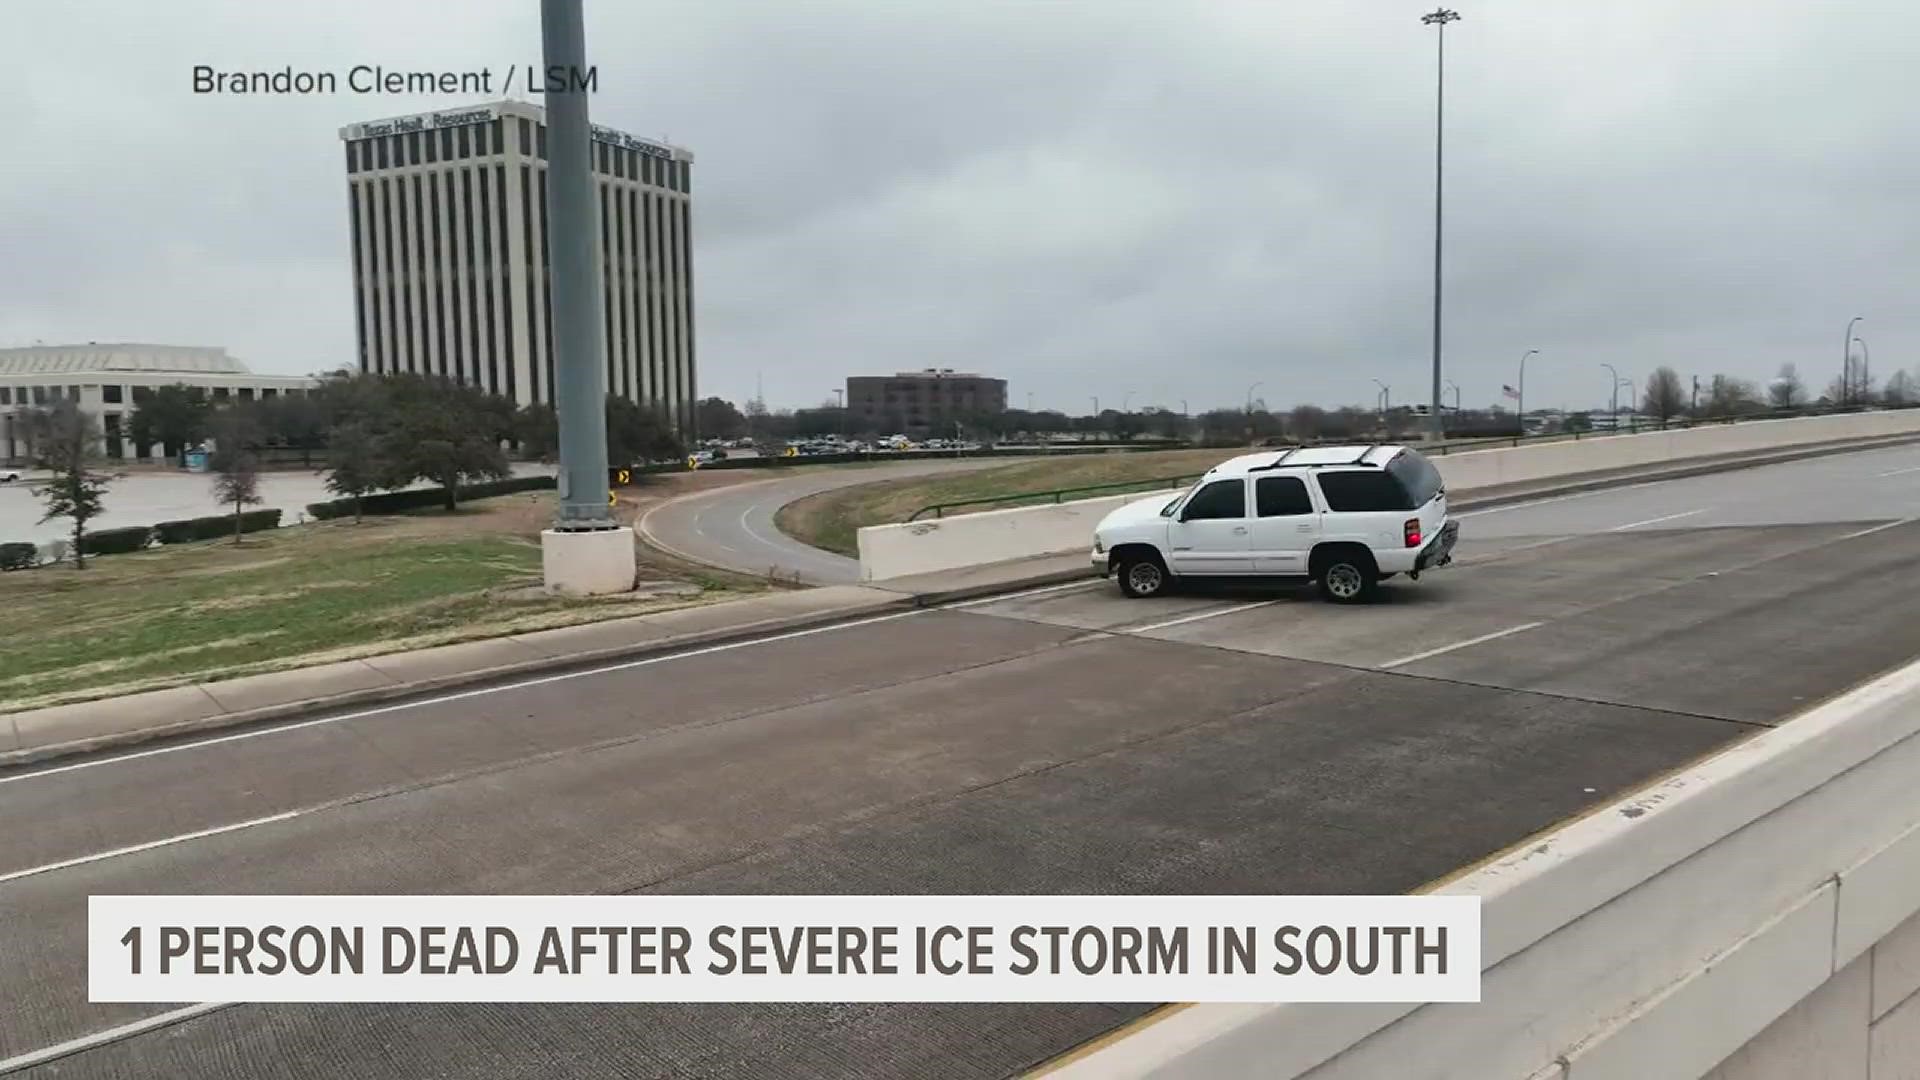 At least one person is dead as a severe ice storm wreaks havoc from Texas to Tennessee. 35 million Americans are still under ice, snow, sleet and heavy rain.